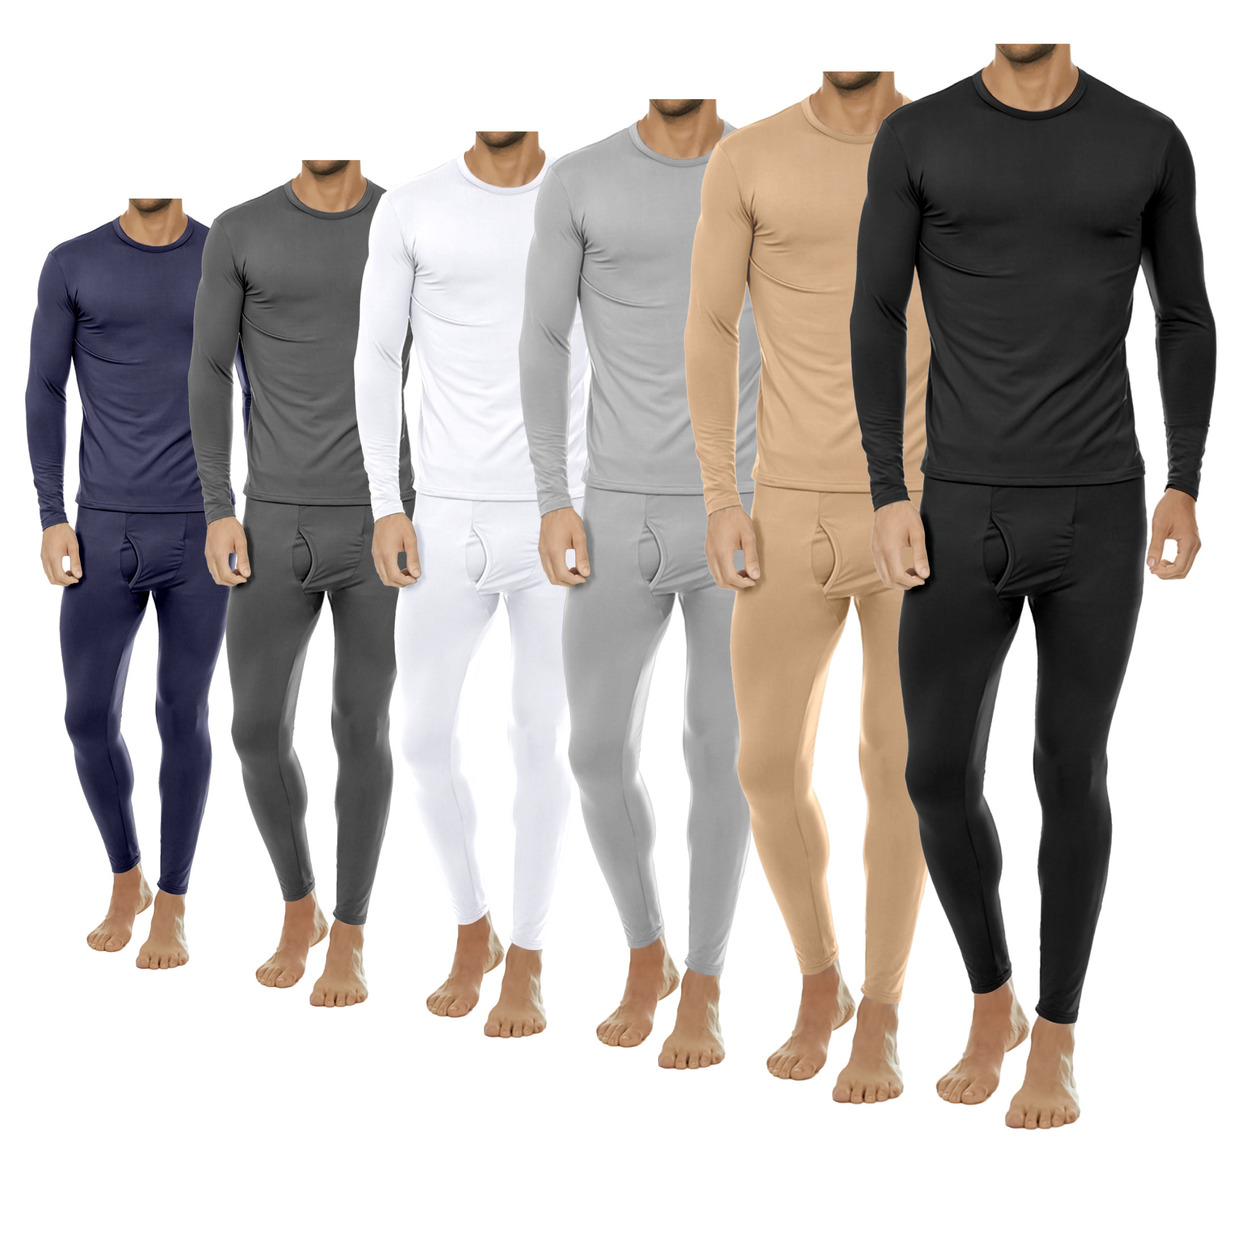 2-Sets: Men's Winter Warm Fleece Lined Thermal Underwear Set For Cold Weather - Navy&navy, X-large